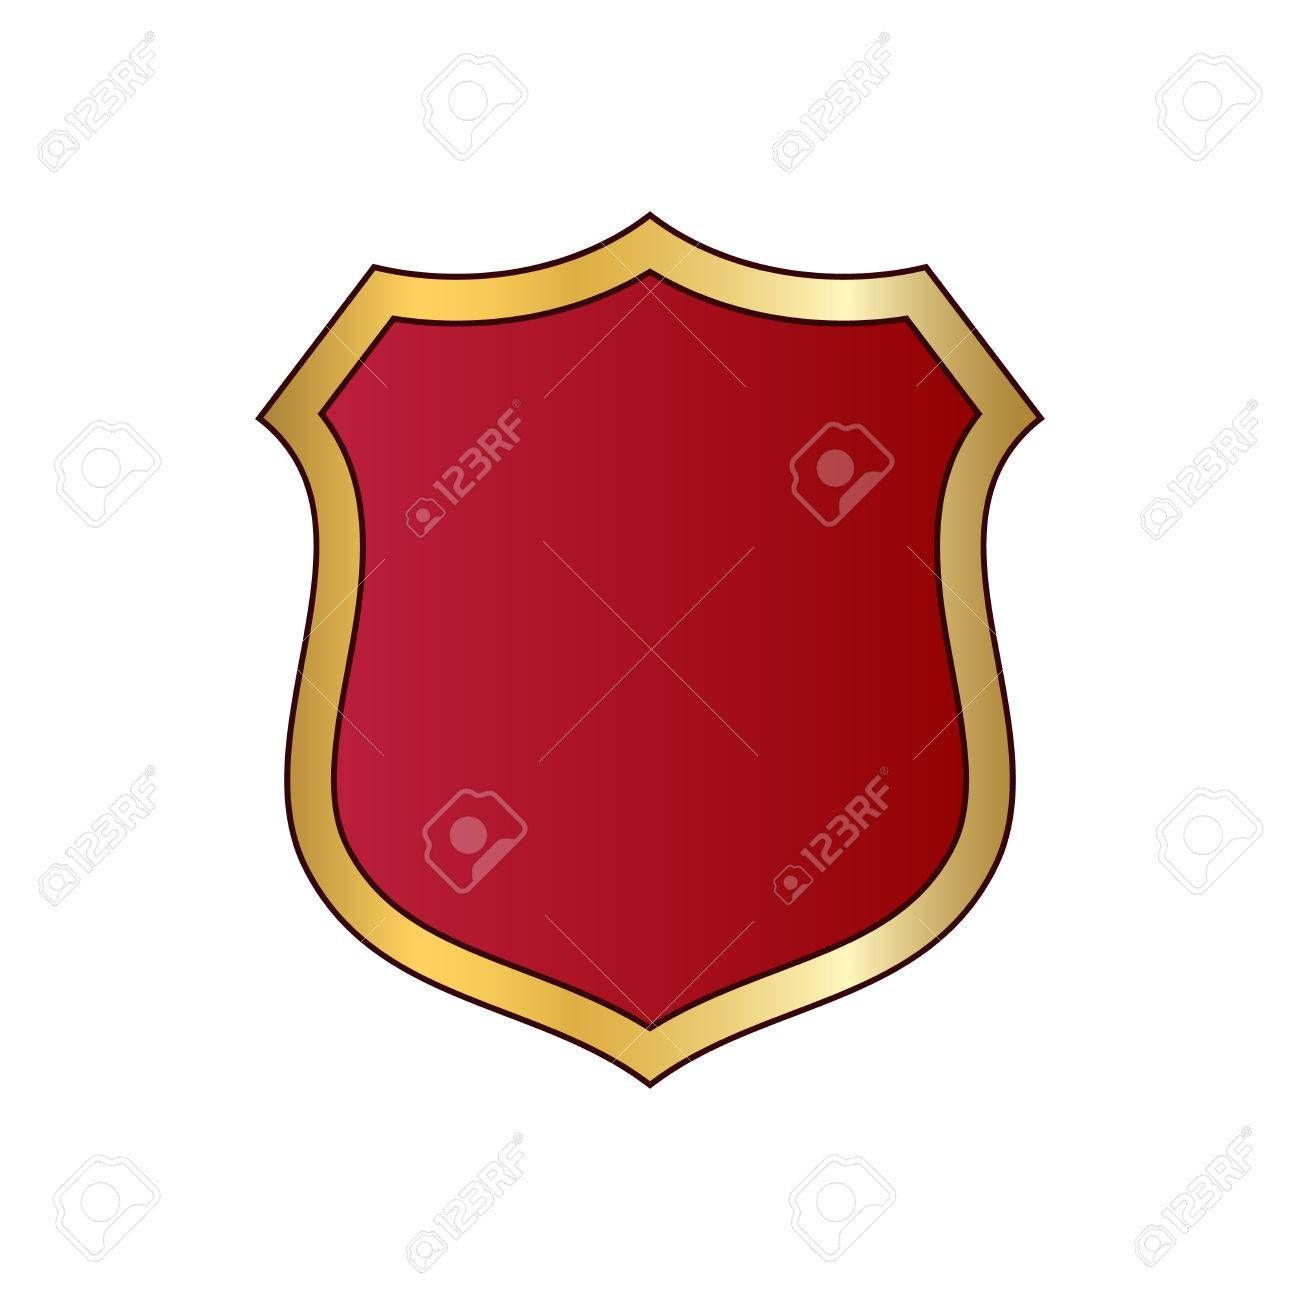 Red Security Shield Logo - Security Shield Clipart badge shape